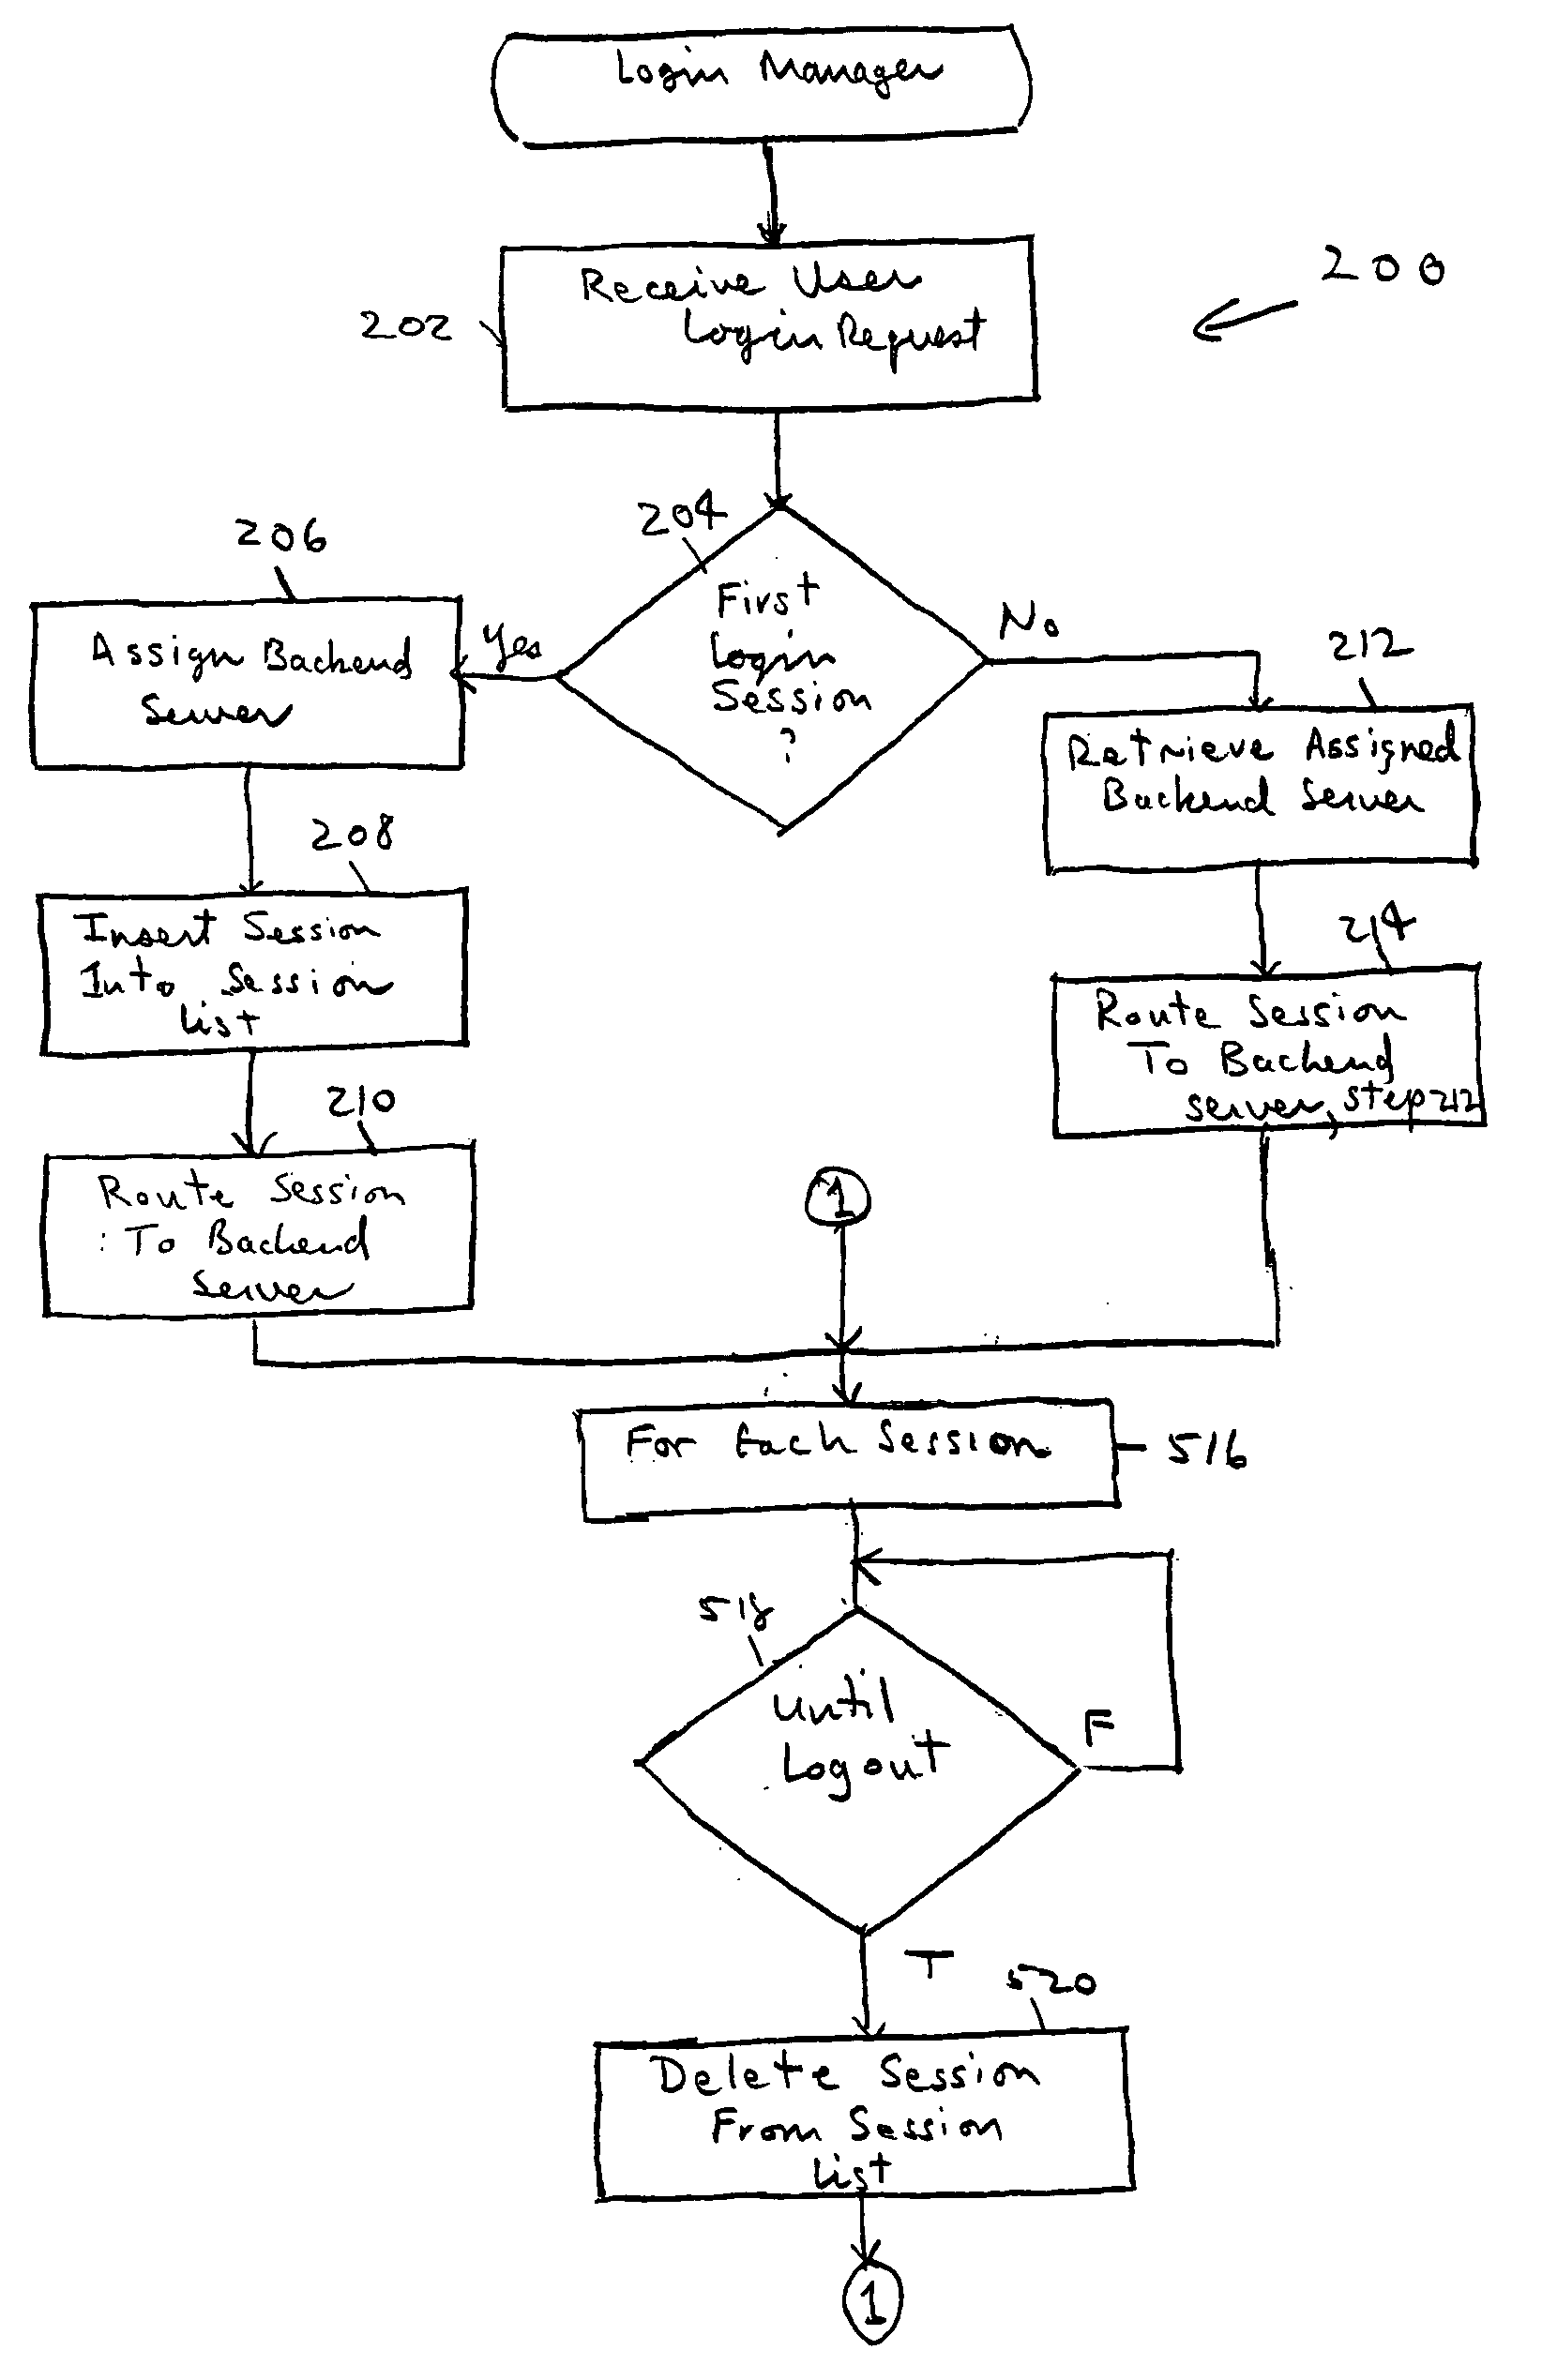 Method and system for multiple instant messaging login sessions